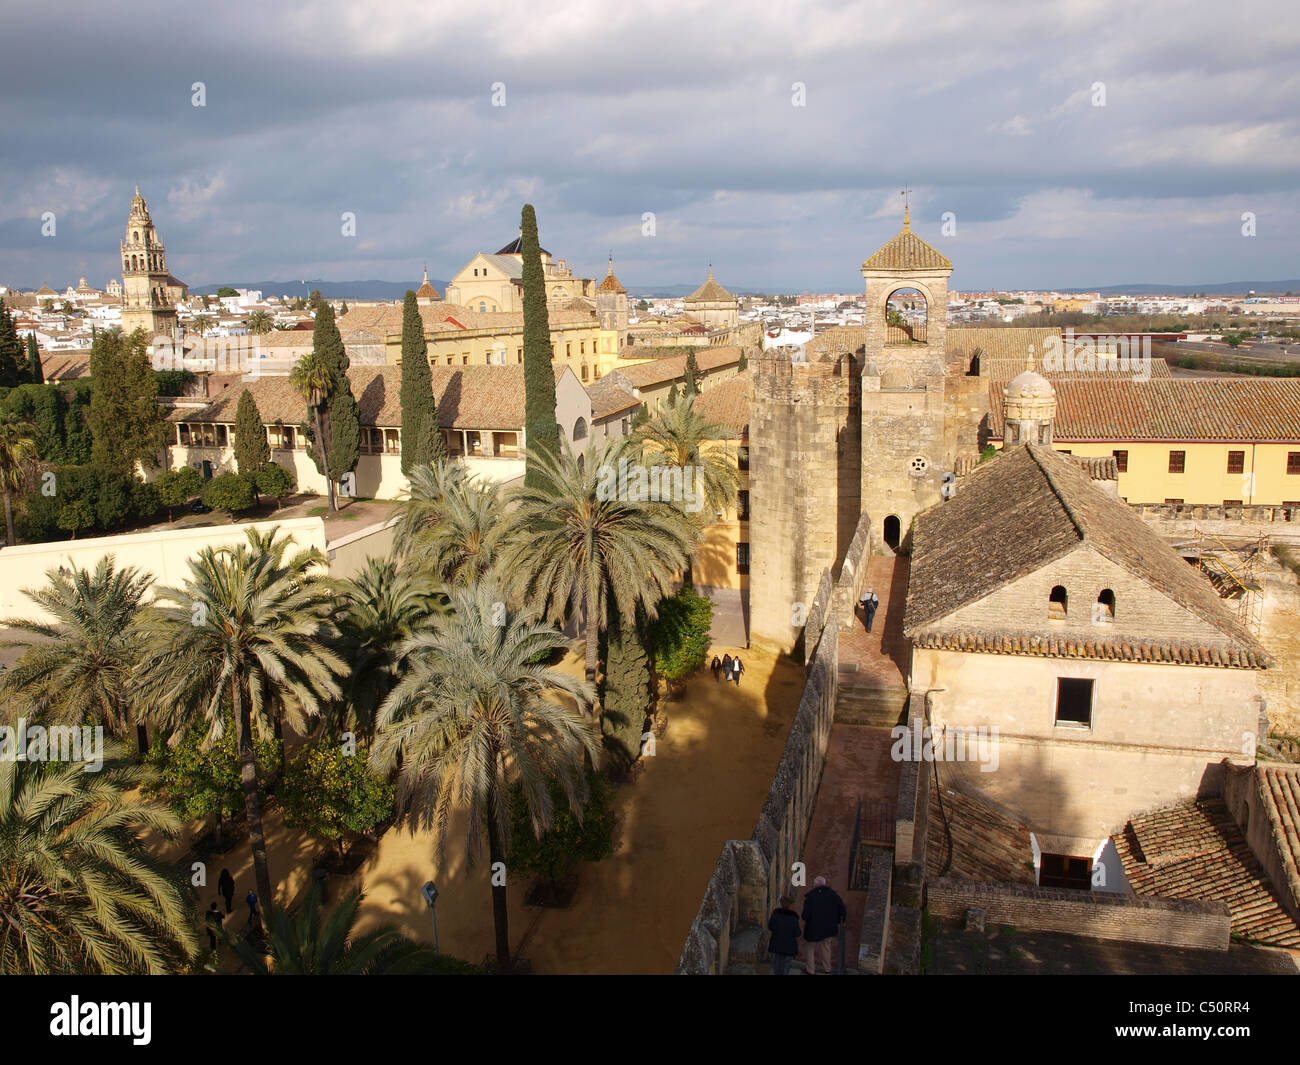 The old part of Cordoba in the late afternoon sun overlooking the town. Stock Photo